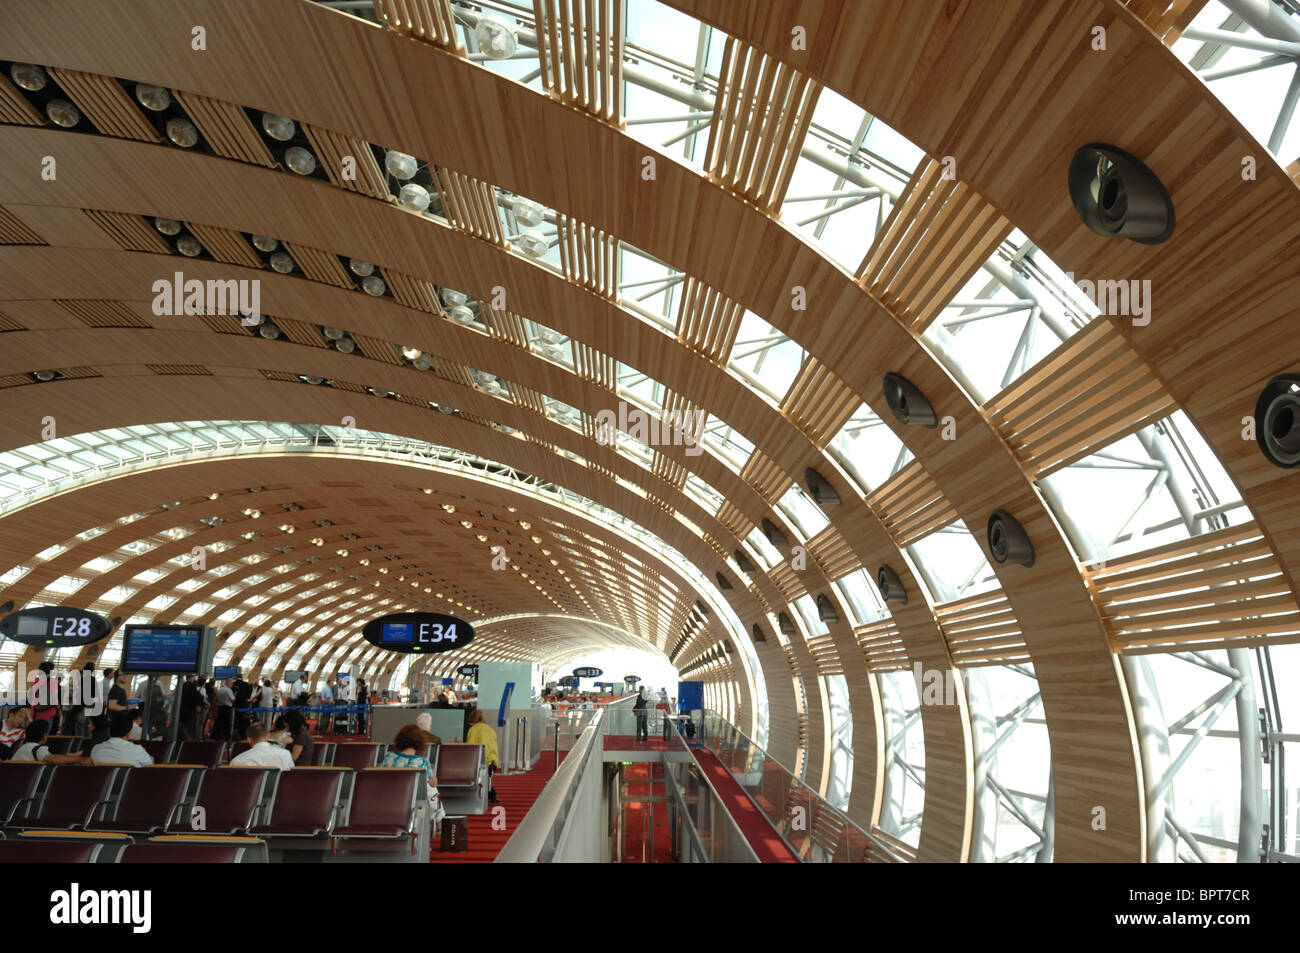 The architecture of Terminal 2 at Paris Charles de Gaulle Airport